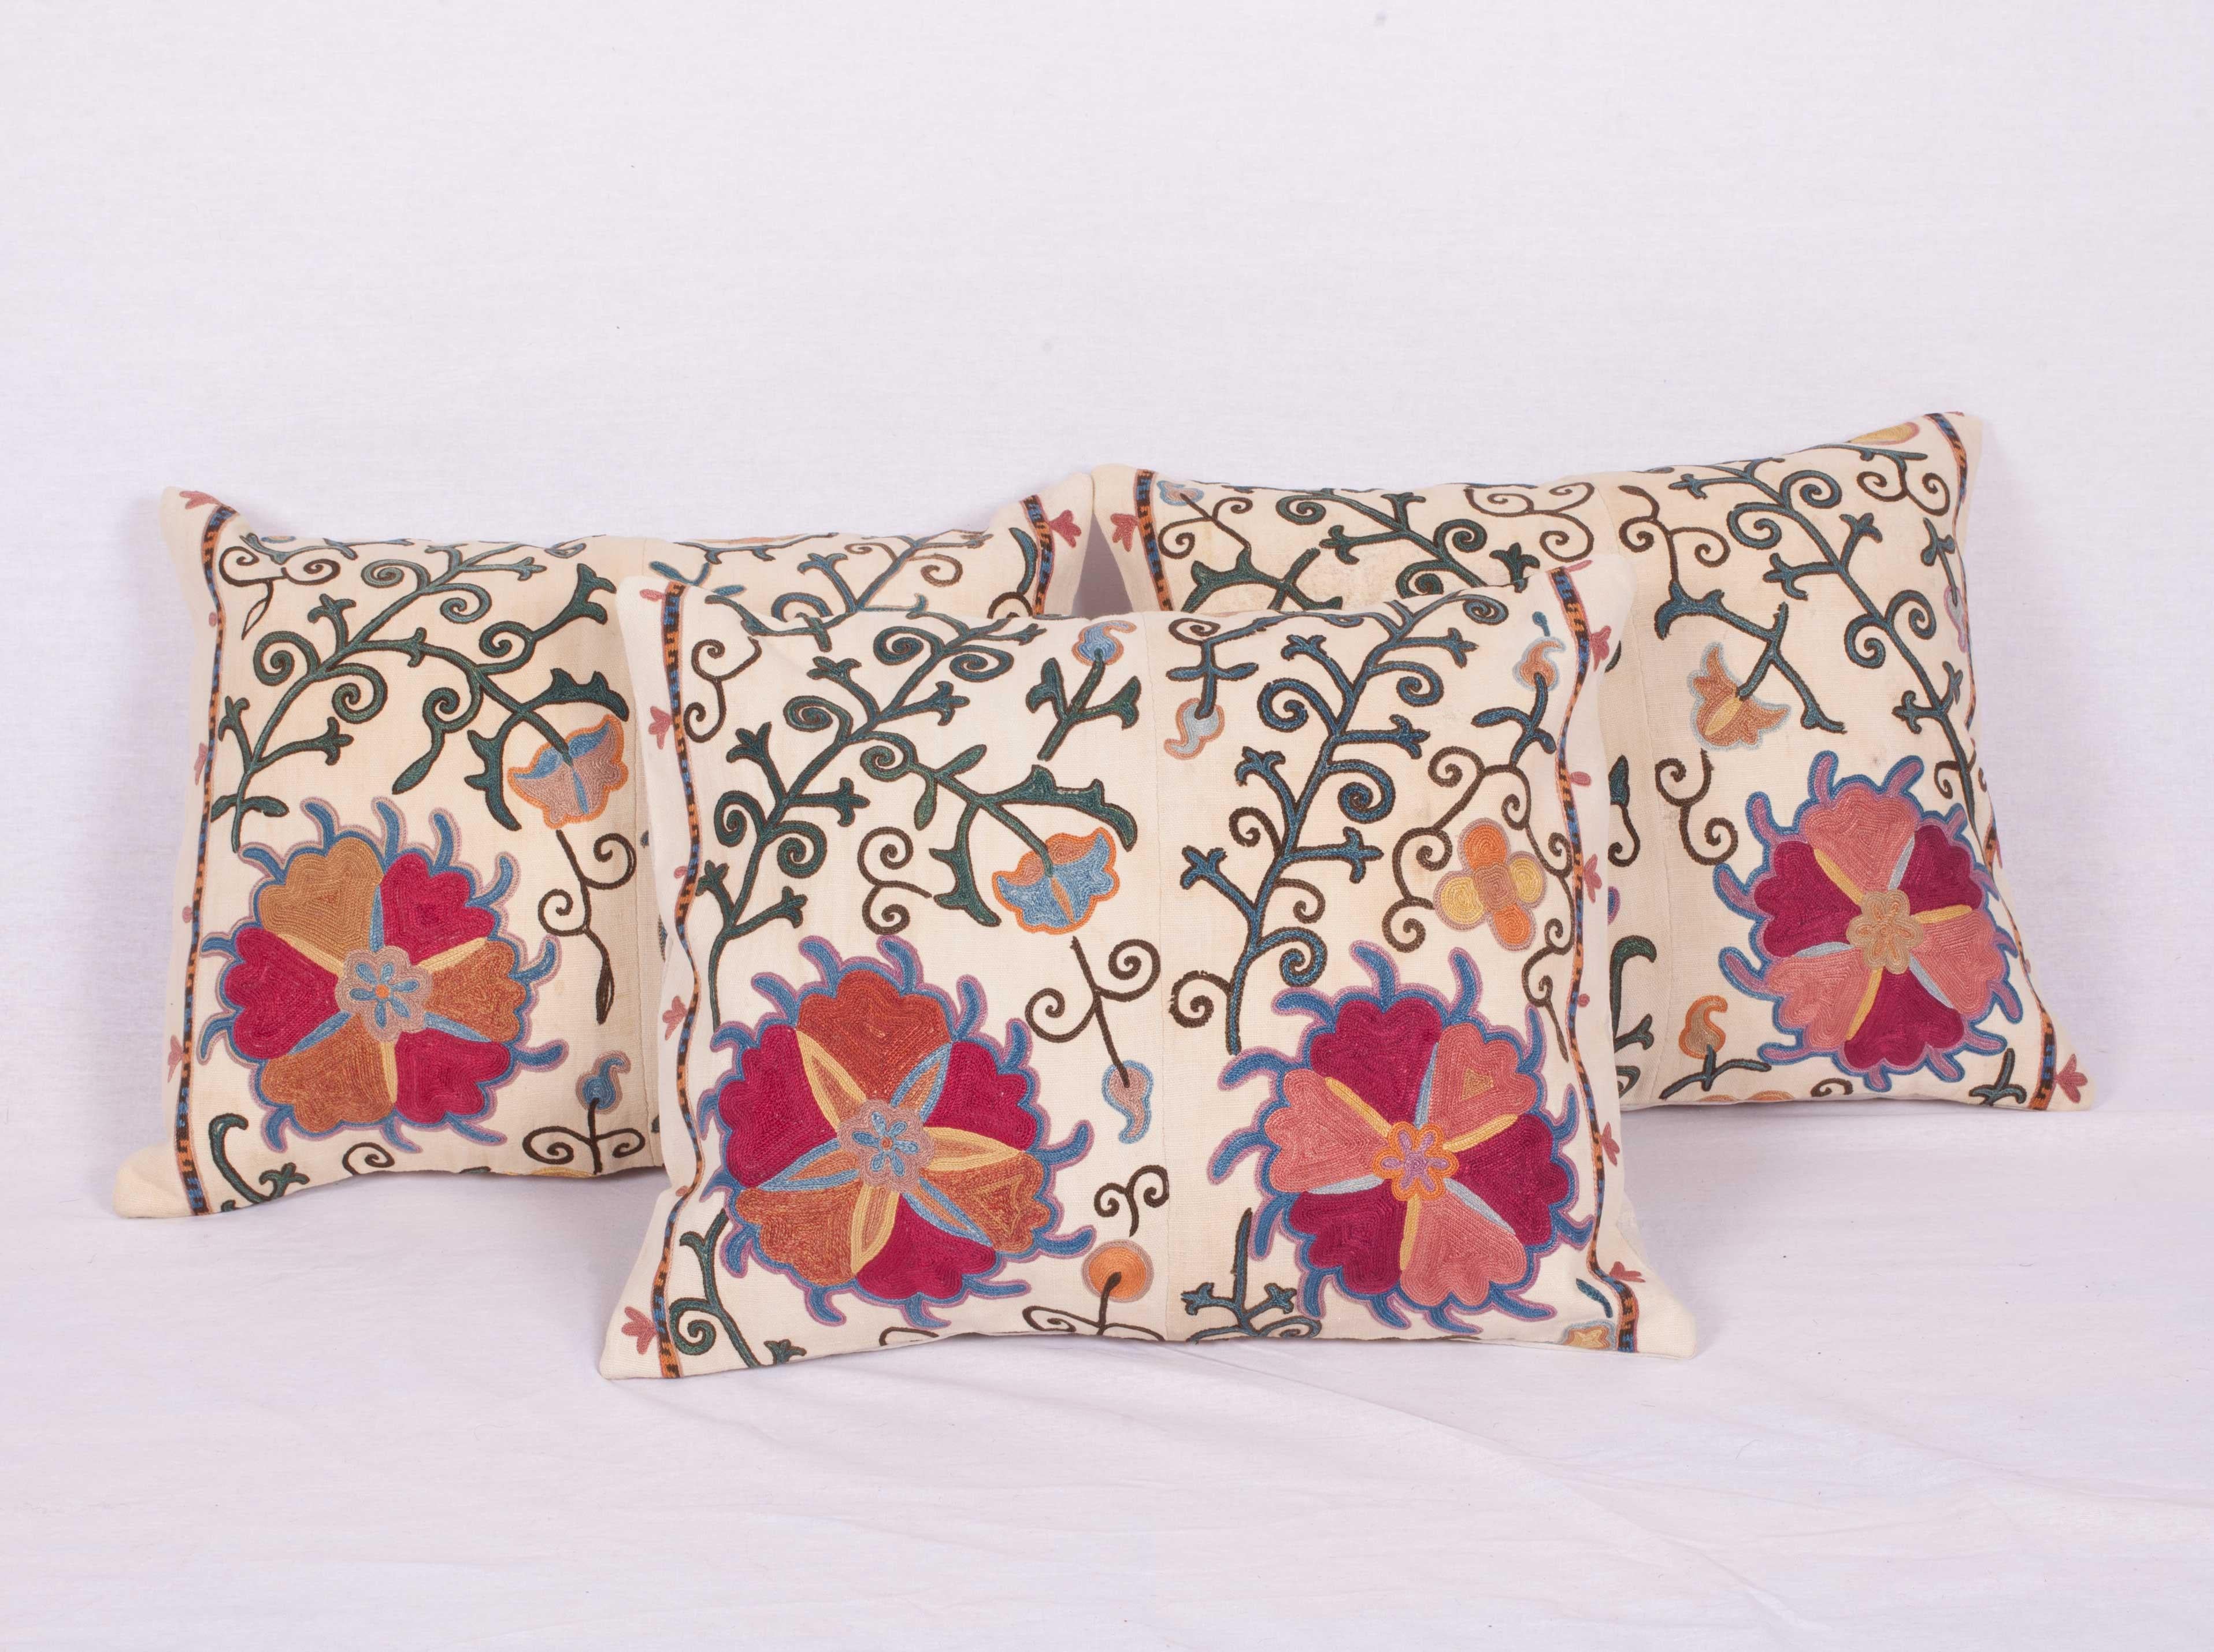 The pillow cases are made from an antique Uzbek Suzani from Bukhara. It is silk embroidery on a handwoven cotton field. The backing is pure linen, and they do not come with inserts but bags made to the size in cotton to accommodate insert materials.